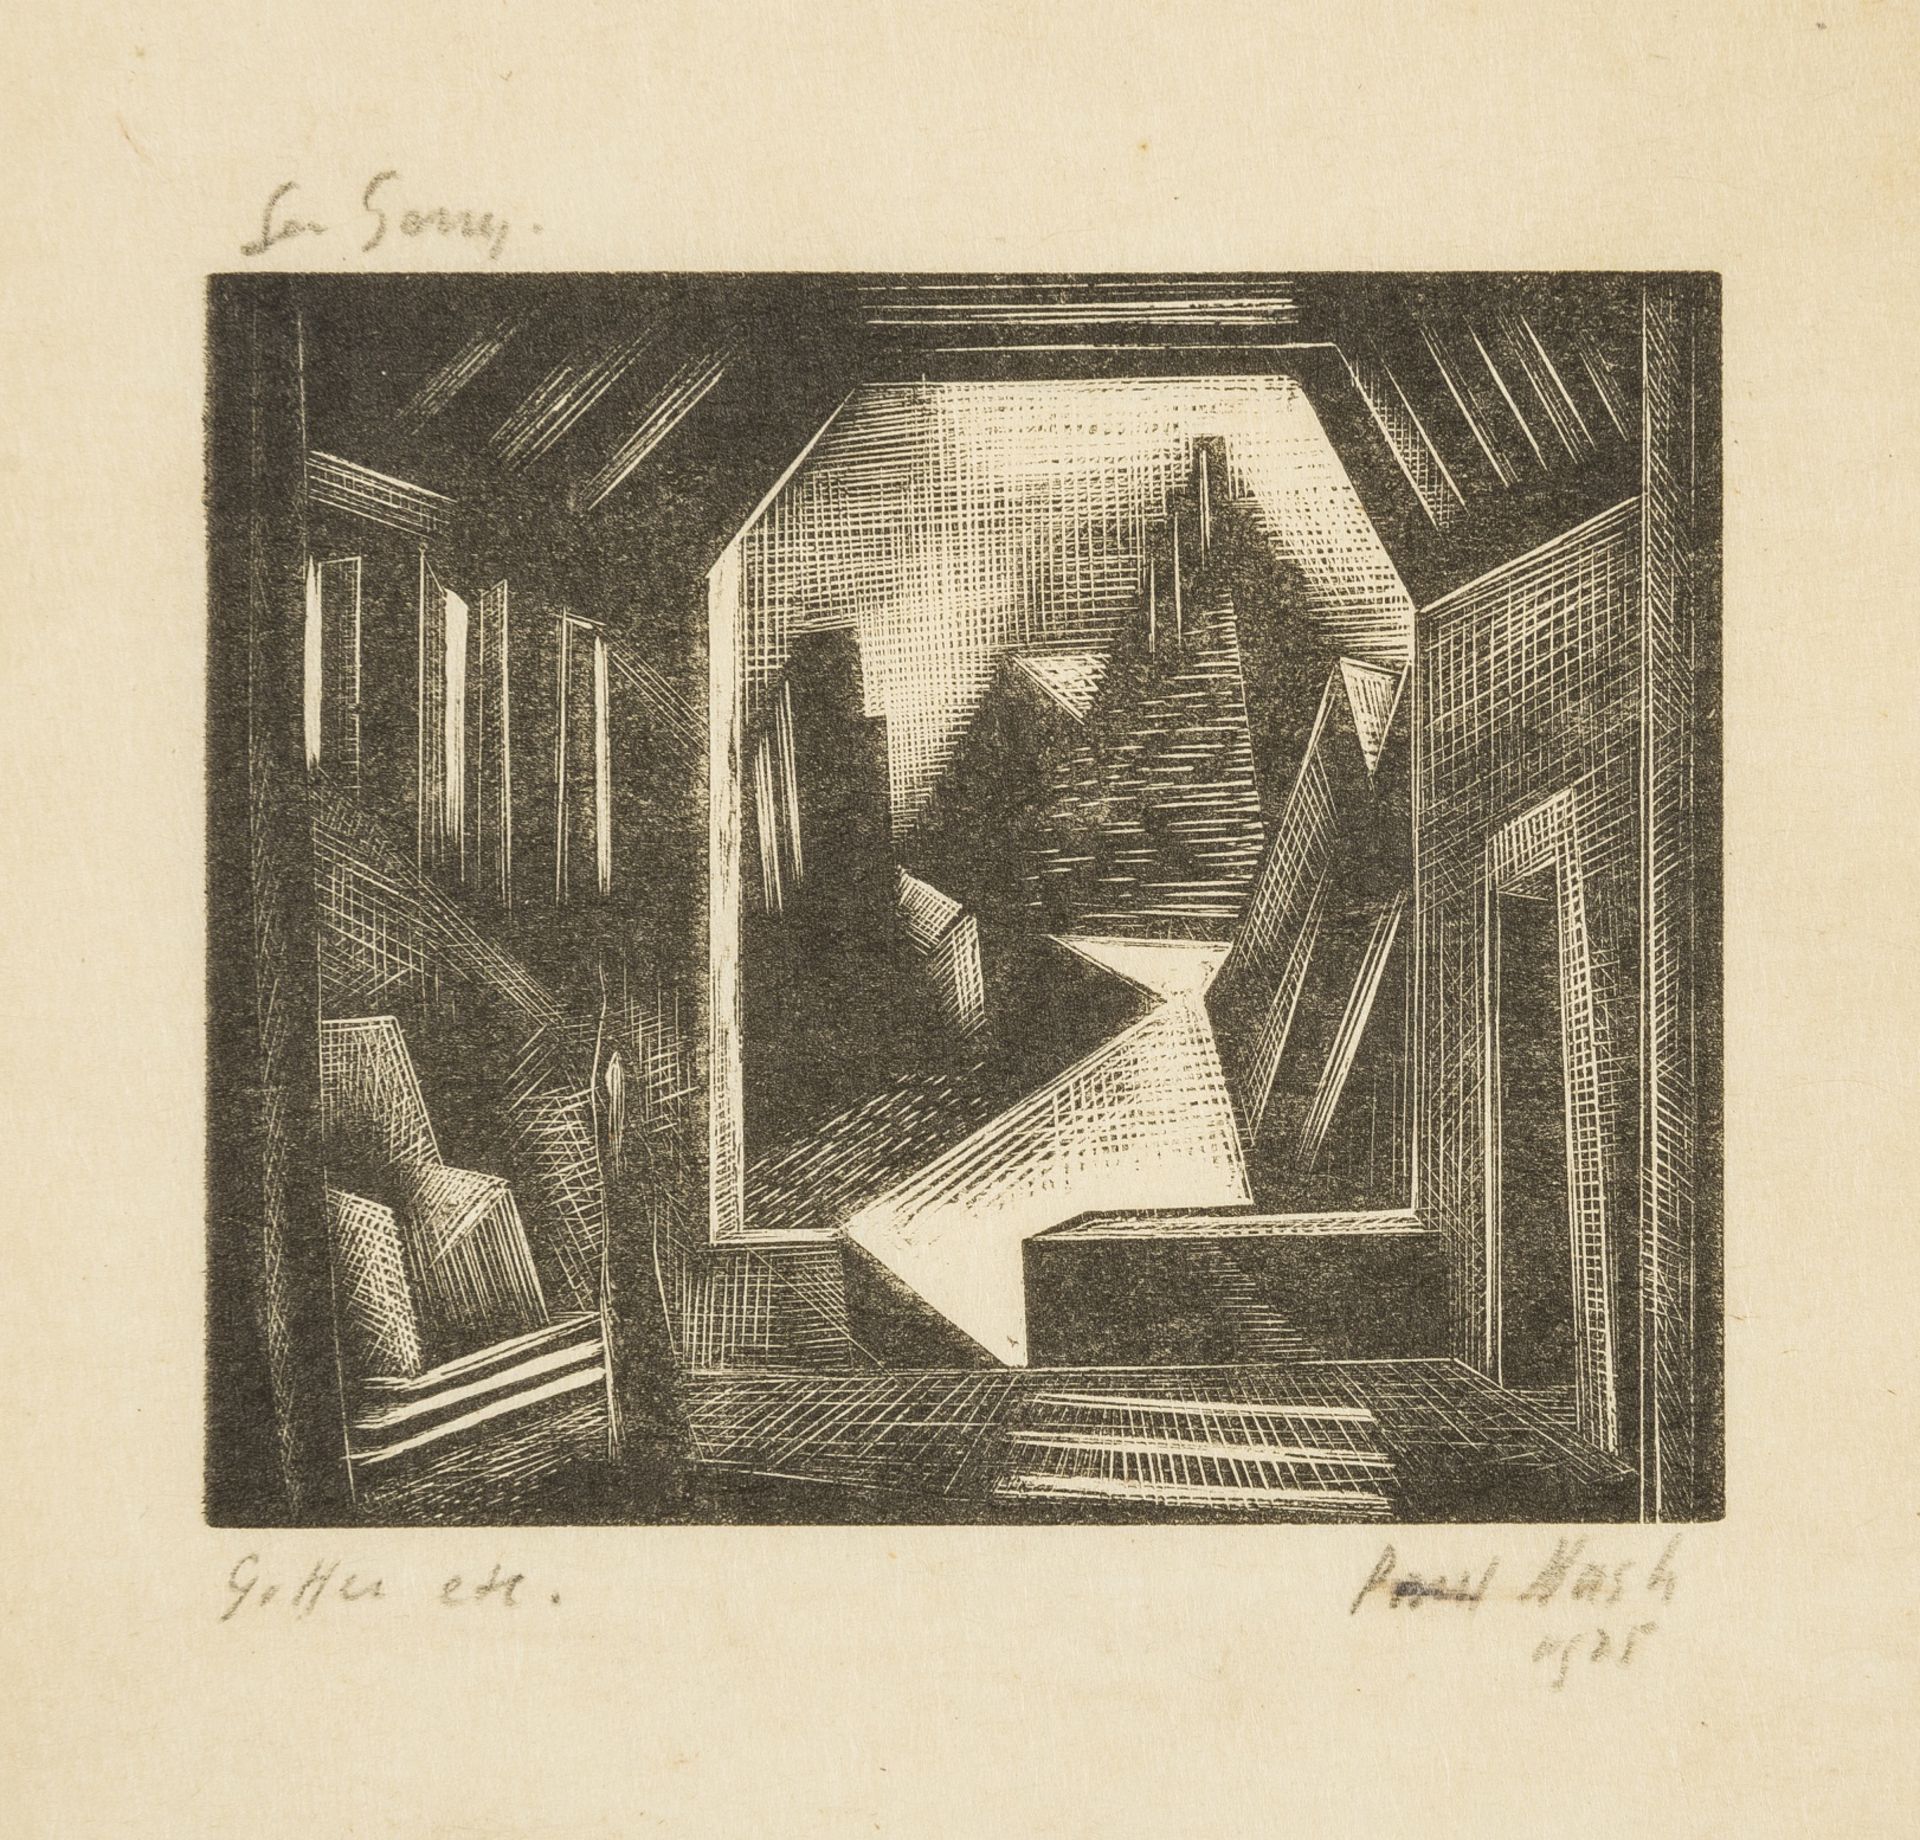 Nash (Paul) The Hall of the Gibichungs, unrecorded proof wood-engraving, 1925.